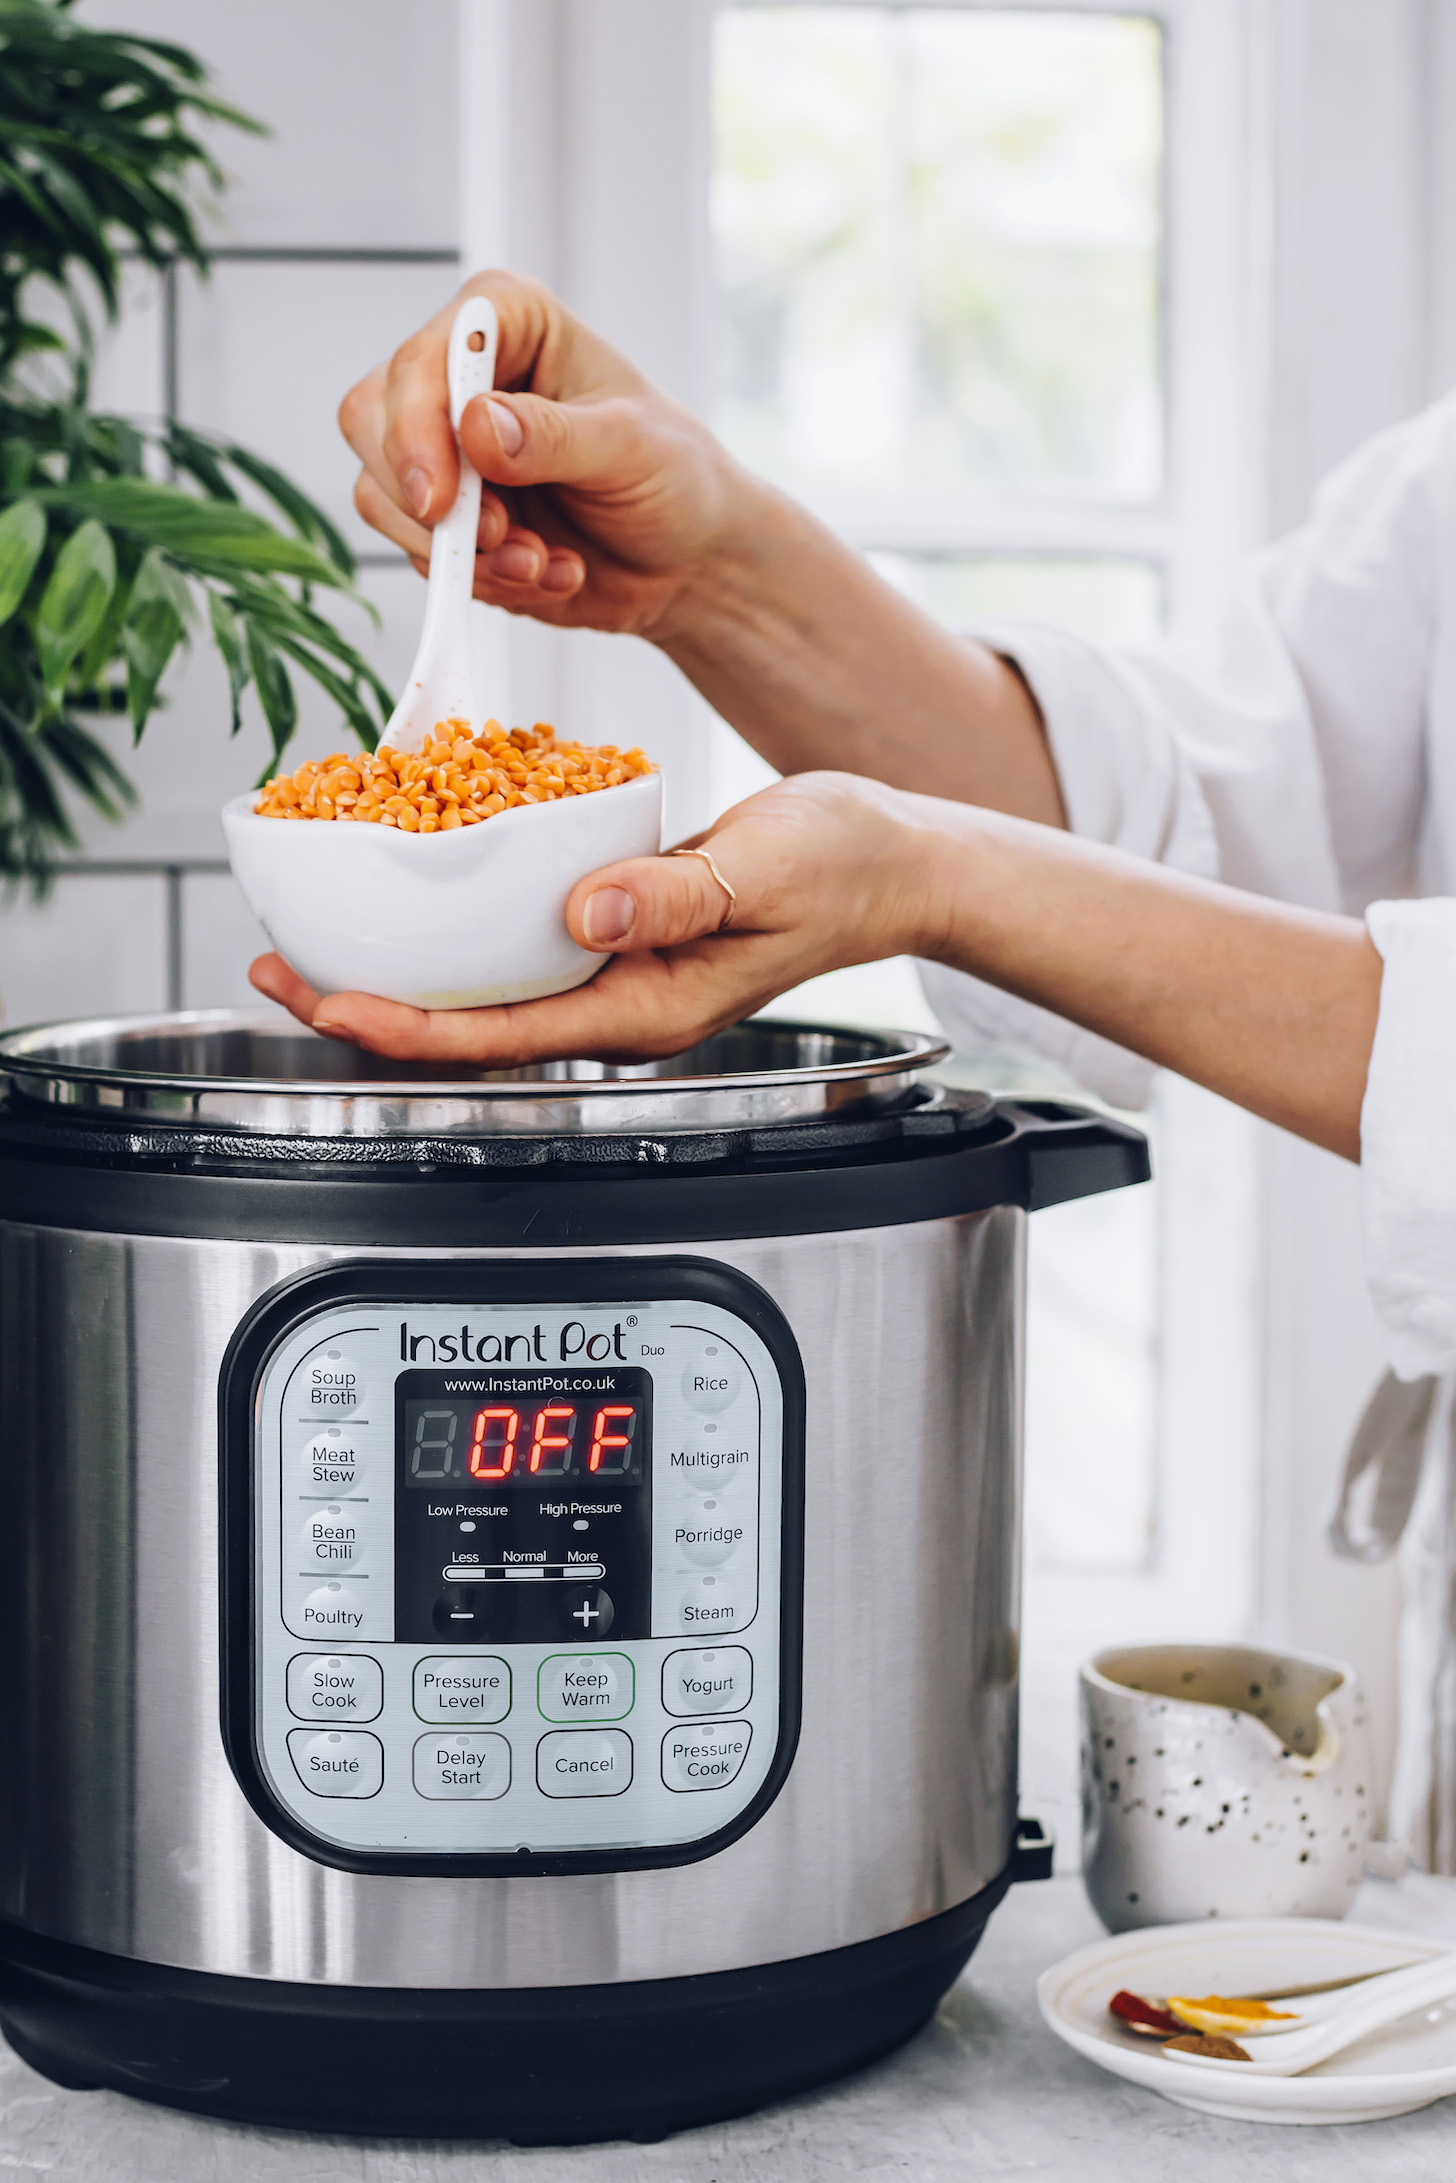 Instant Pot IP-DUO Review from Pressure Cooking Today